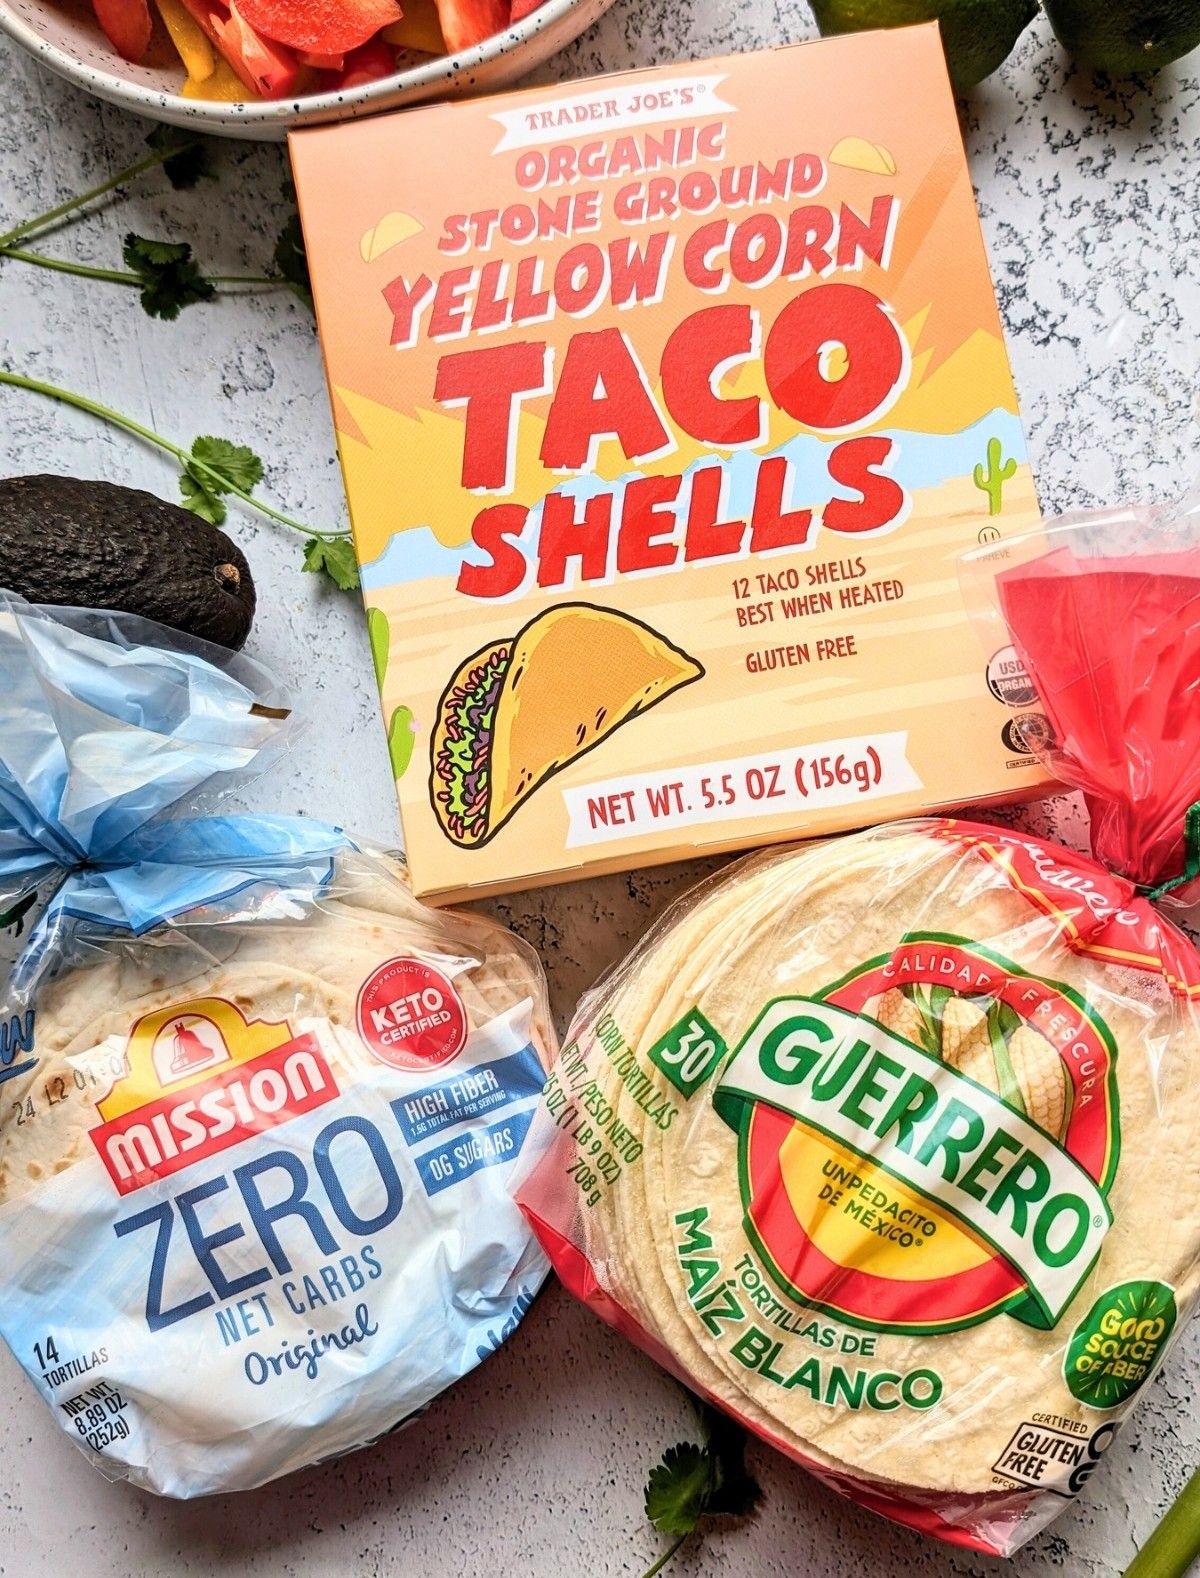 low sodium taco shell options for fajitas corn tortillas and flour tortillas with low salt or no salt added from trader joe's mission zero carb and guererro brand